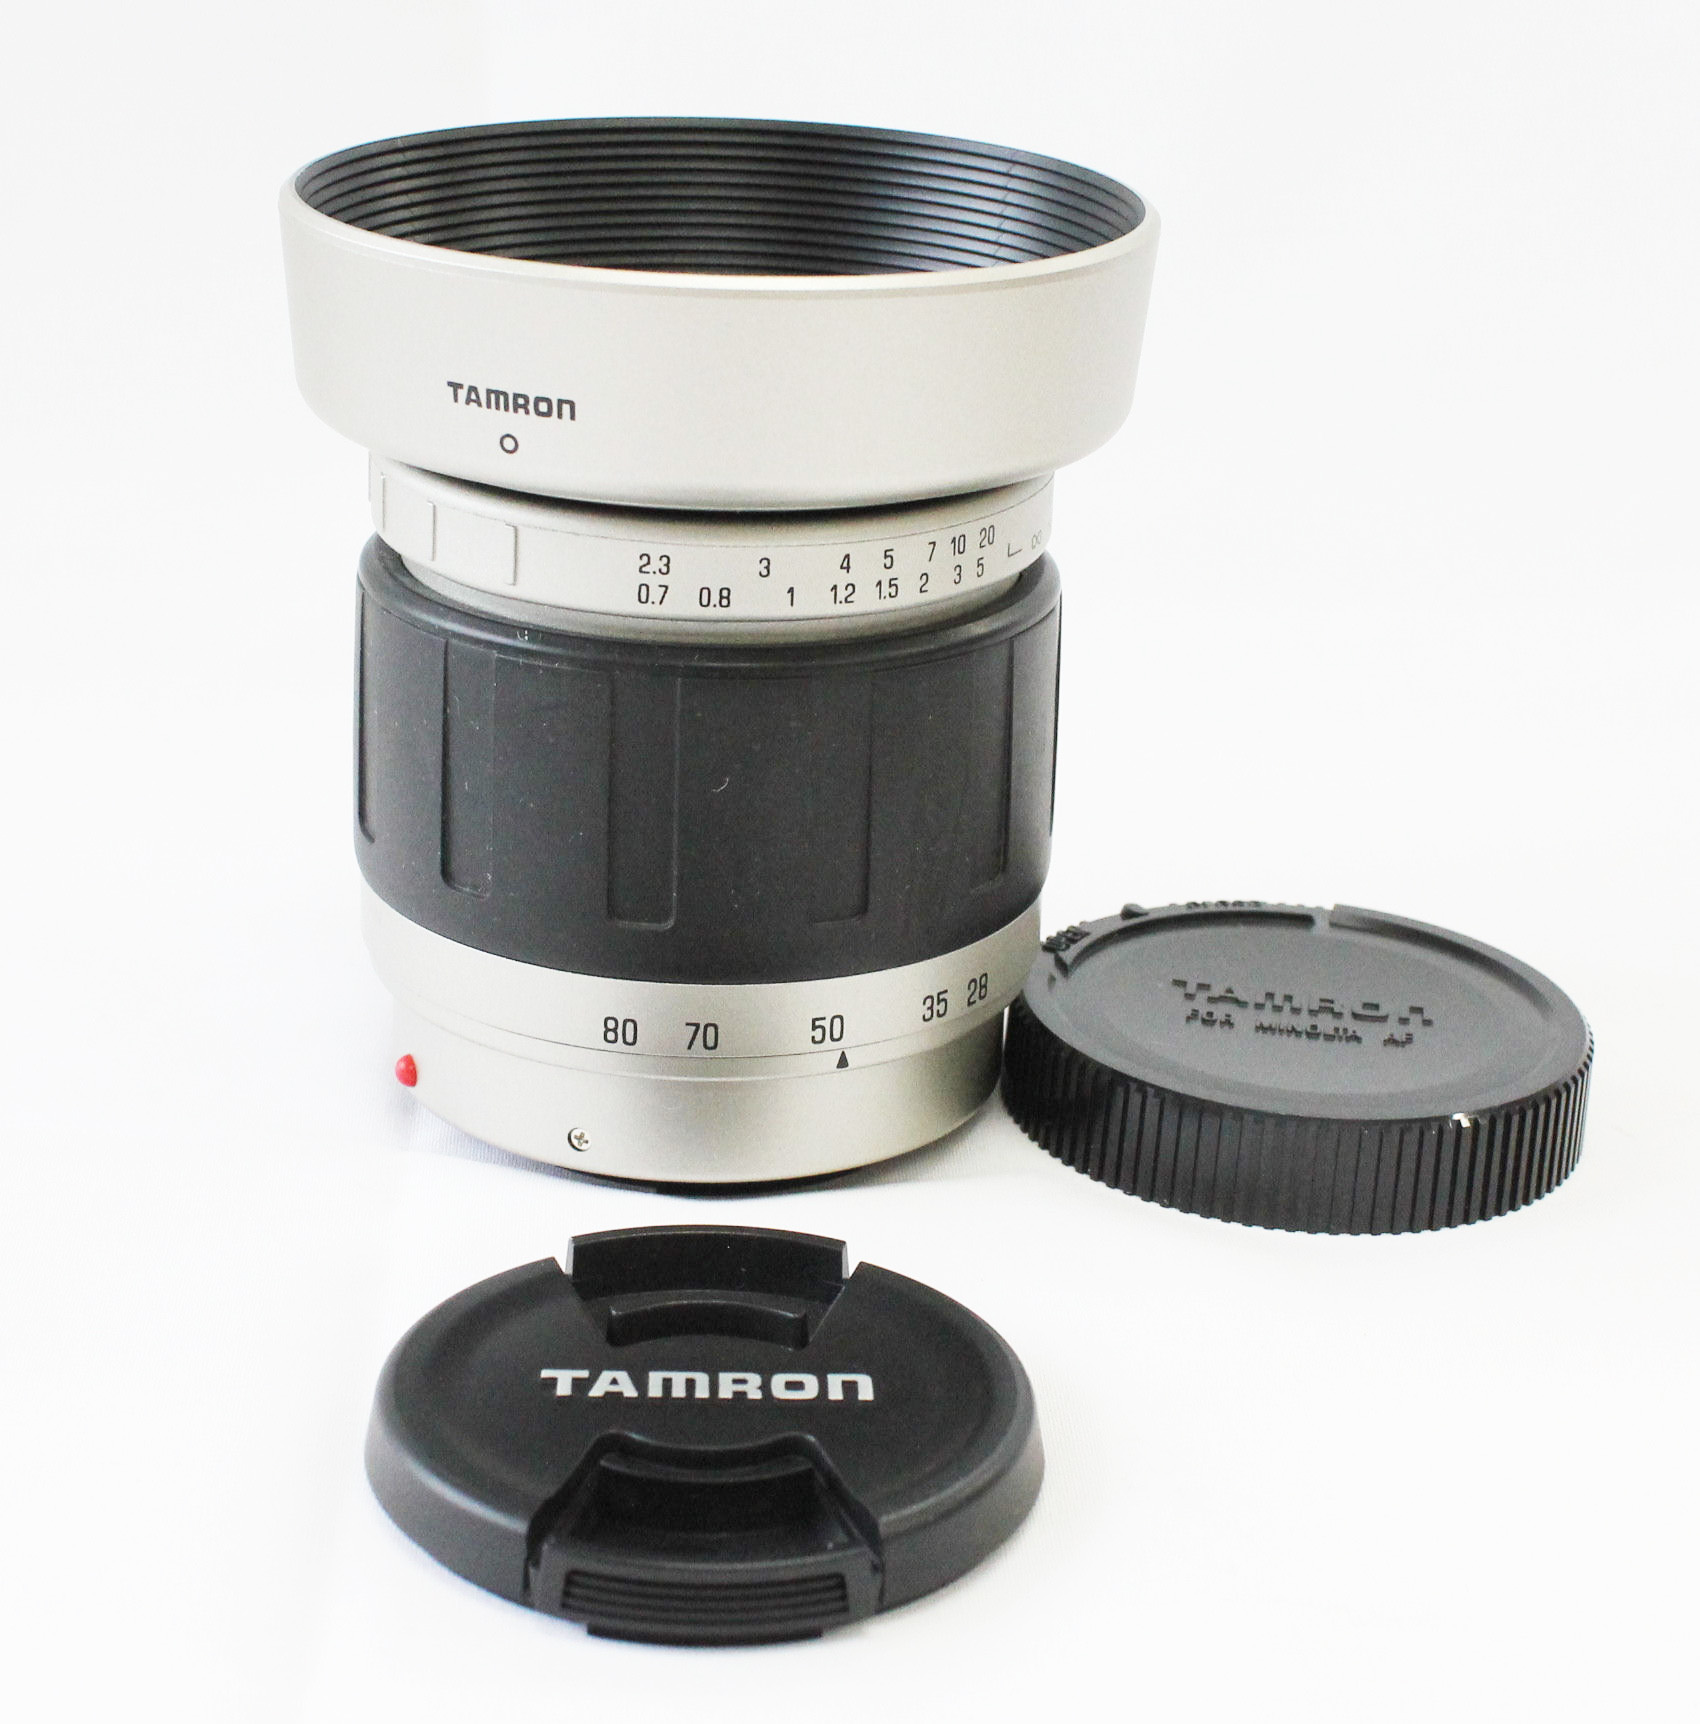  Tamron AF 28-80mm F/3.5-5.6 Lens with Hood for Minolta/Sony A Mount from Japan Photo 1